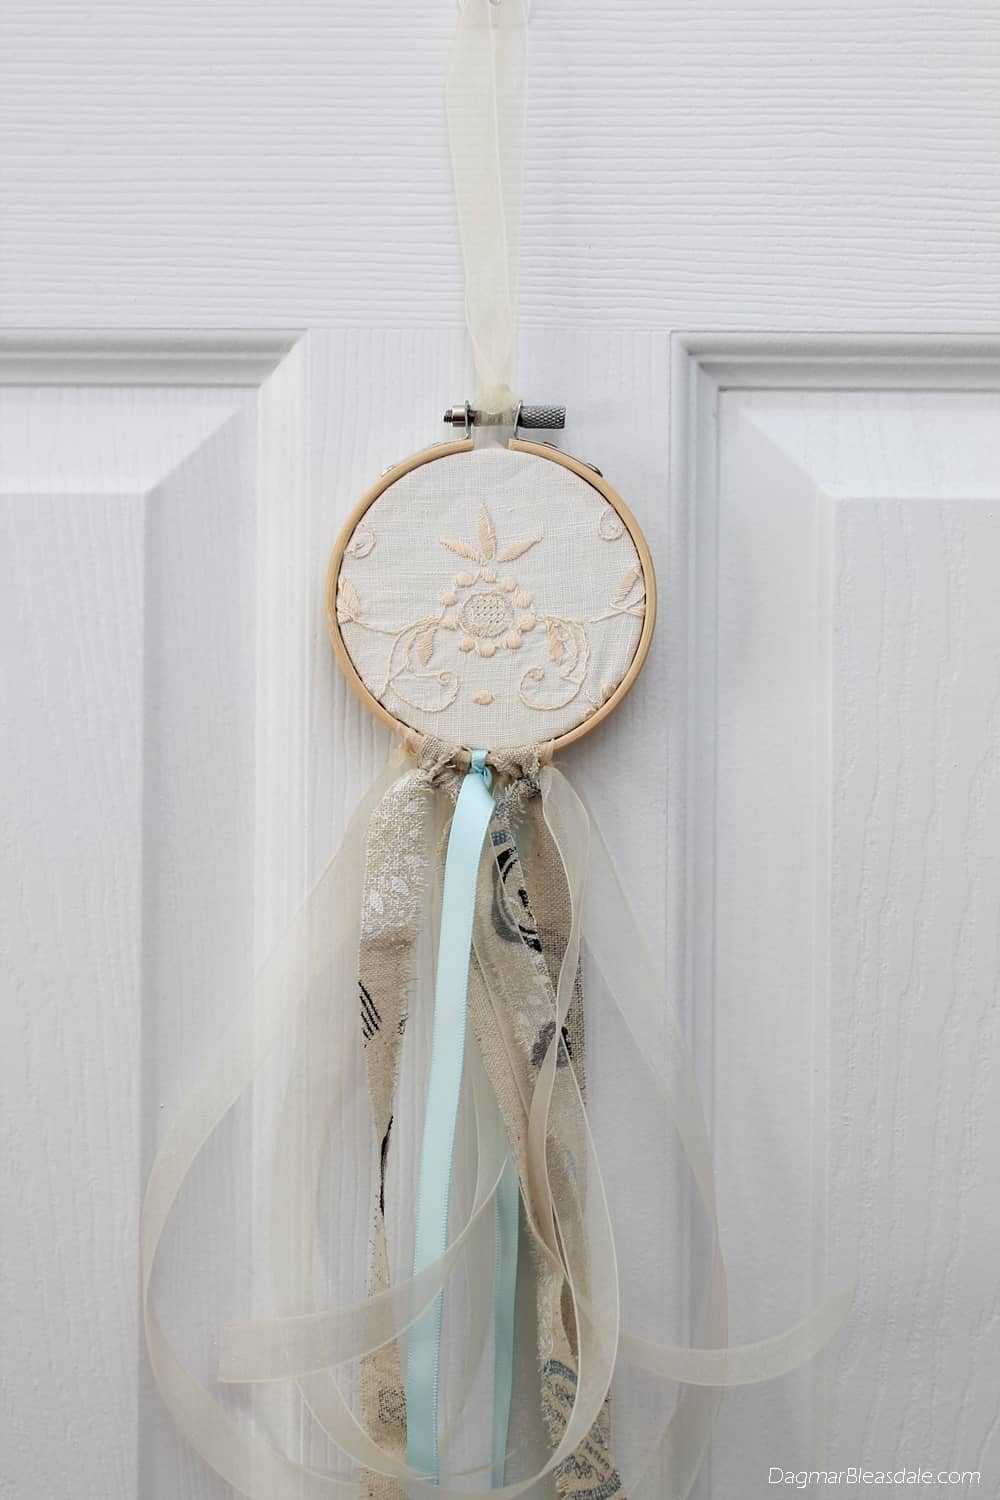 DIY dreamcatcher with lace, embroidery hoop, and ribbons